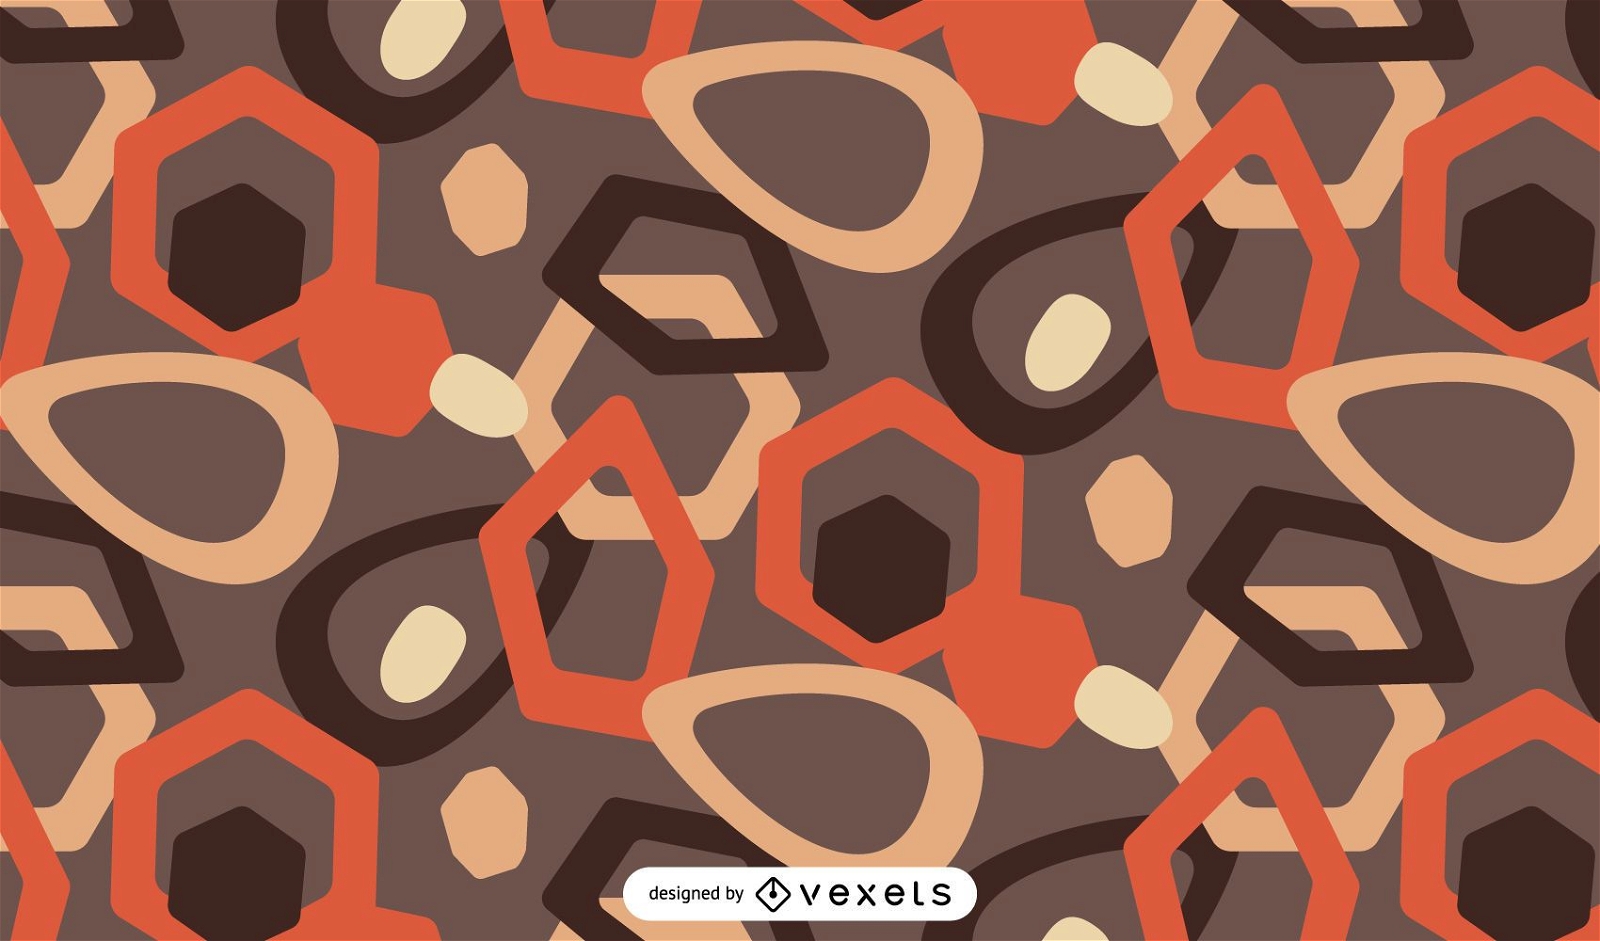 Geometrical abstract pattern design